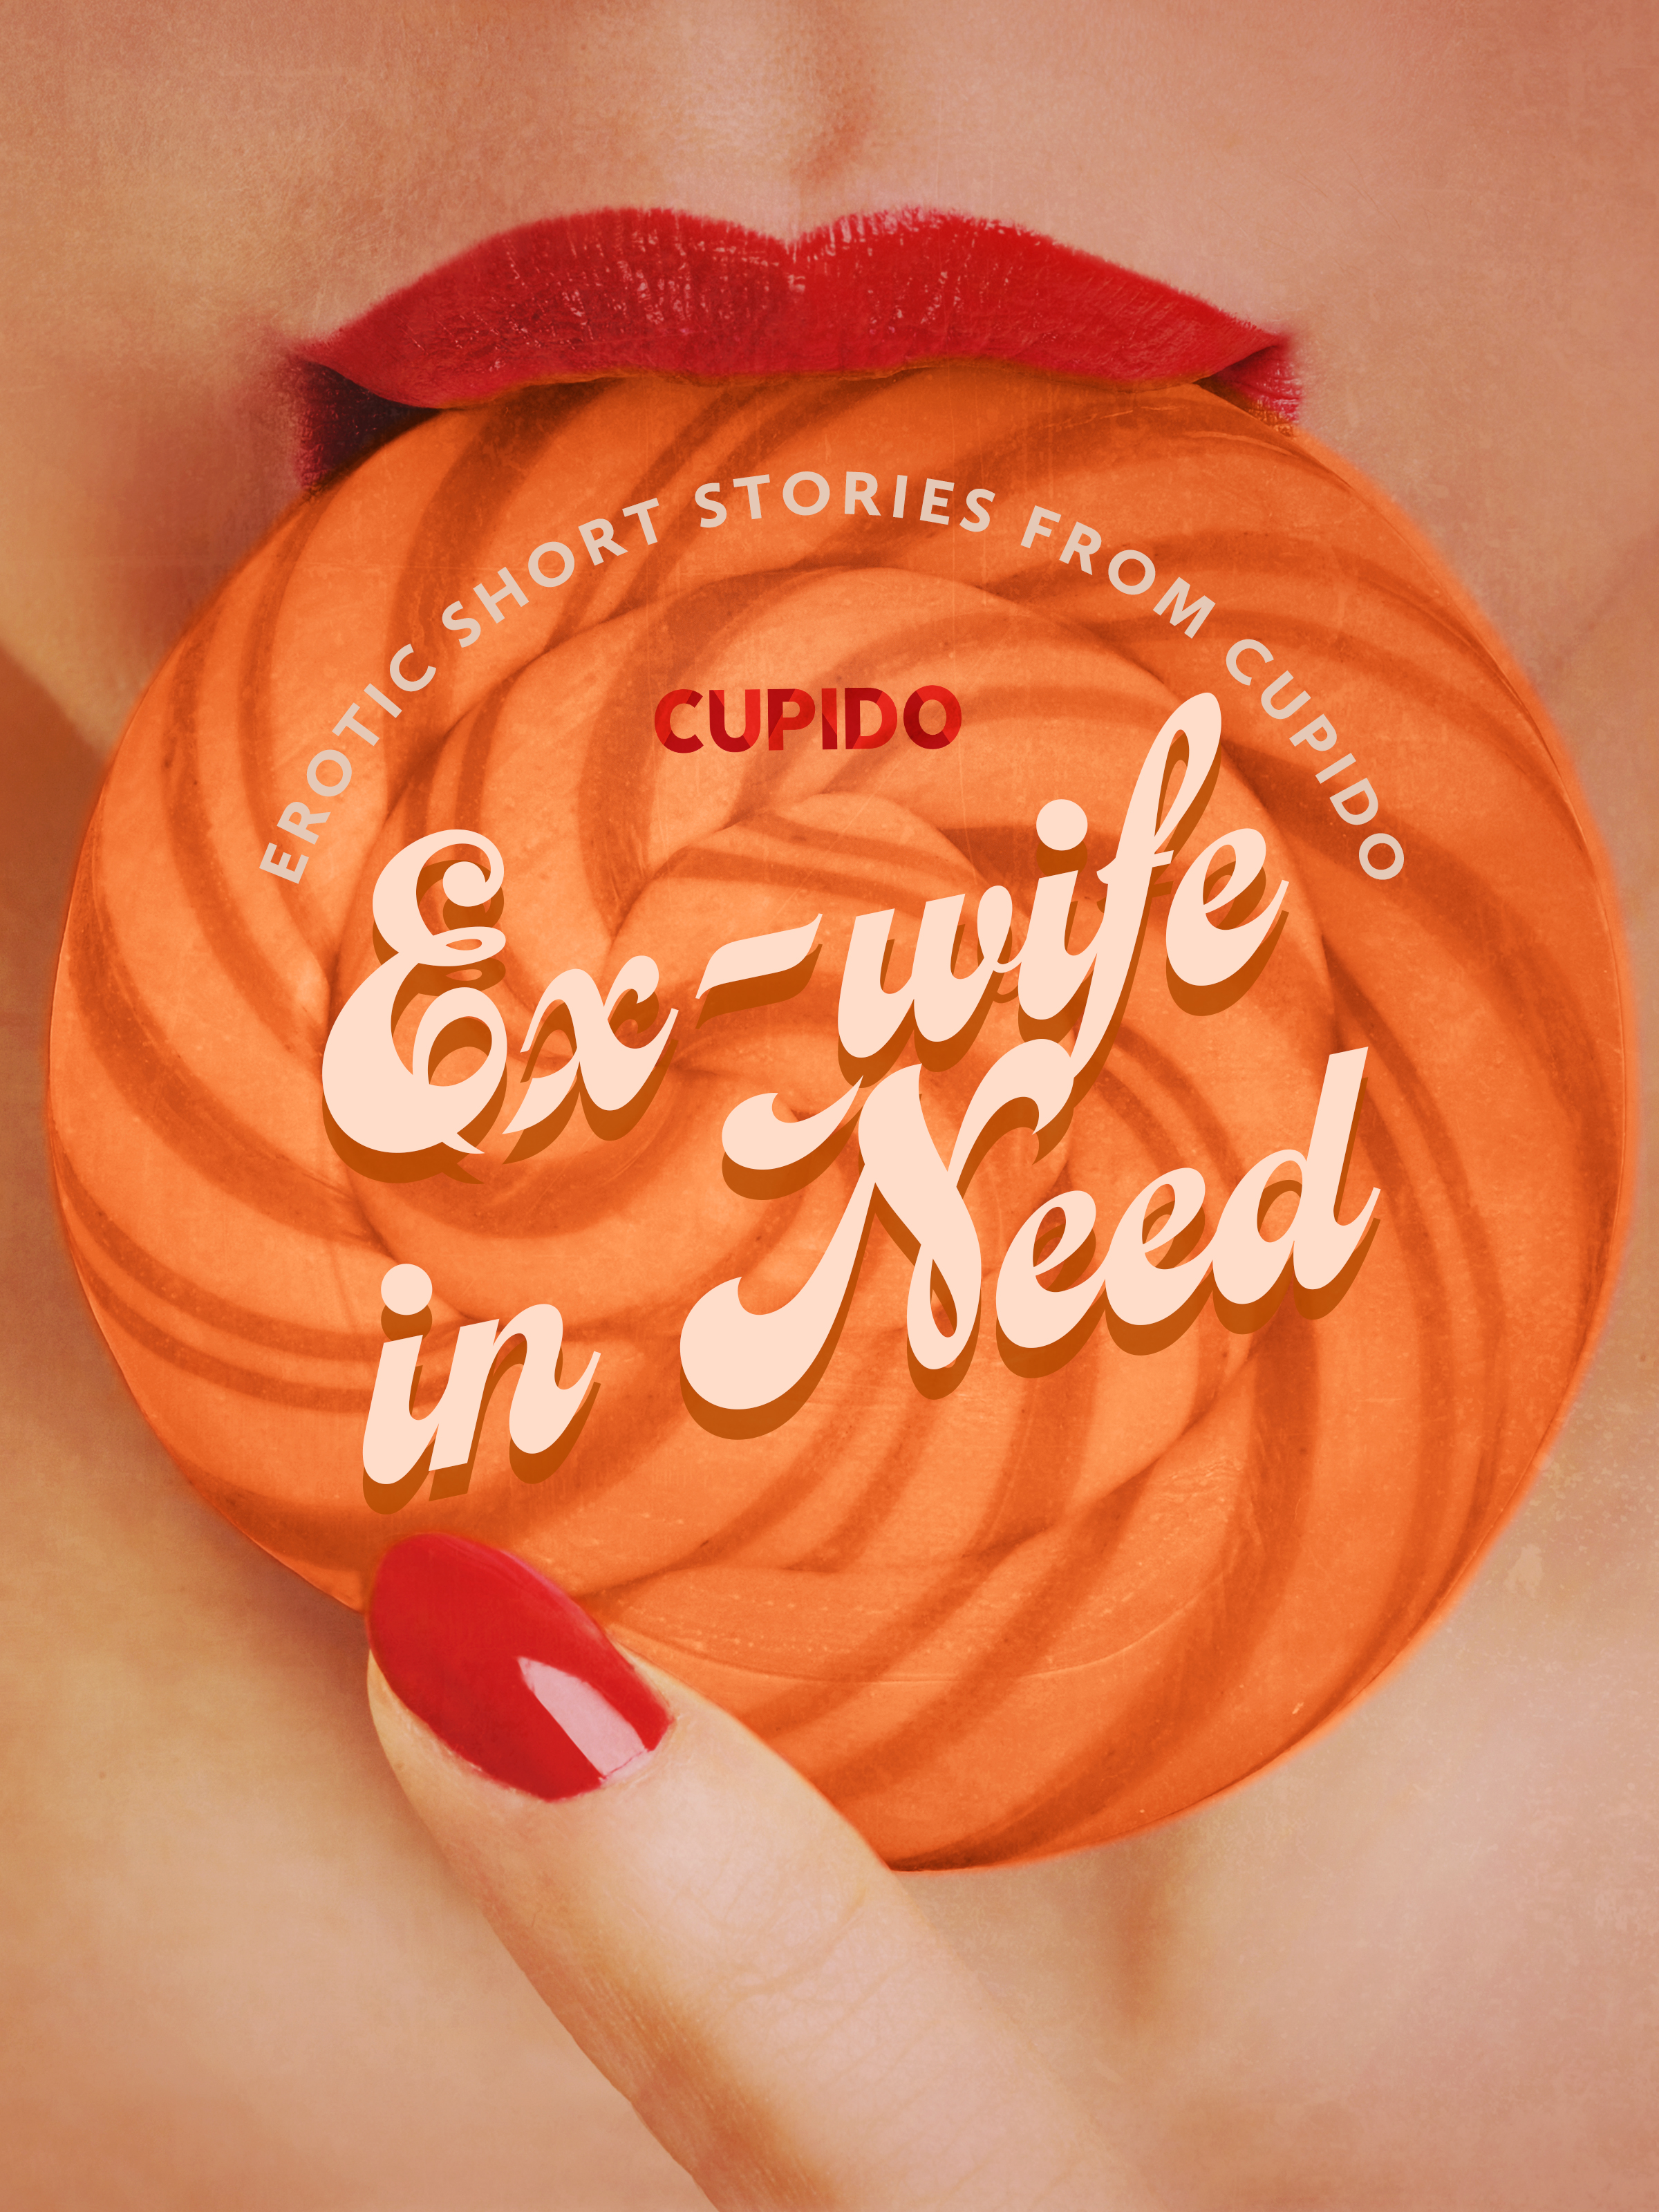 Ex-wife in Need - and Other Erotic Short Stories from Cupido